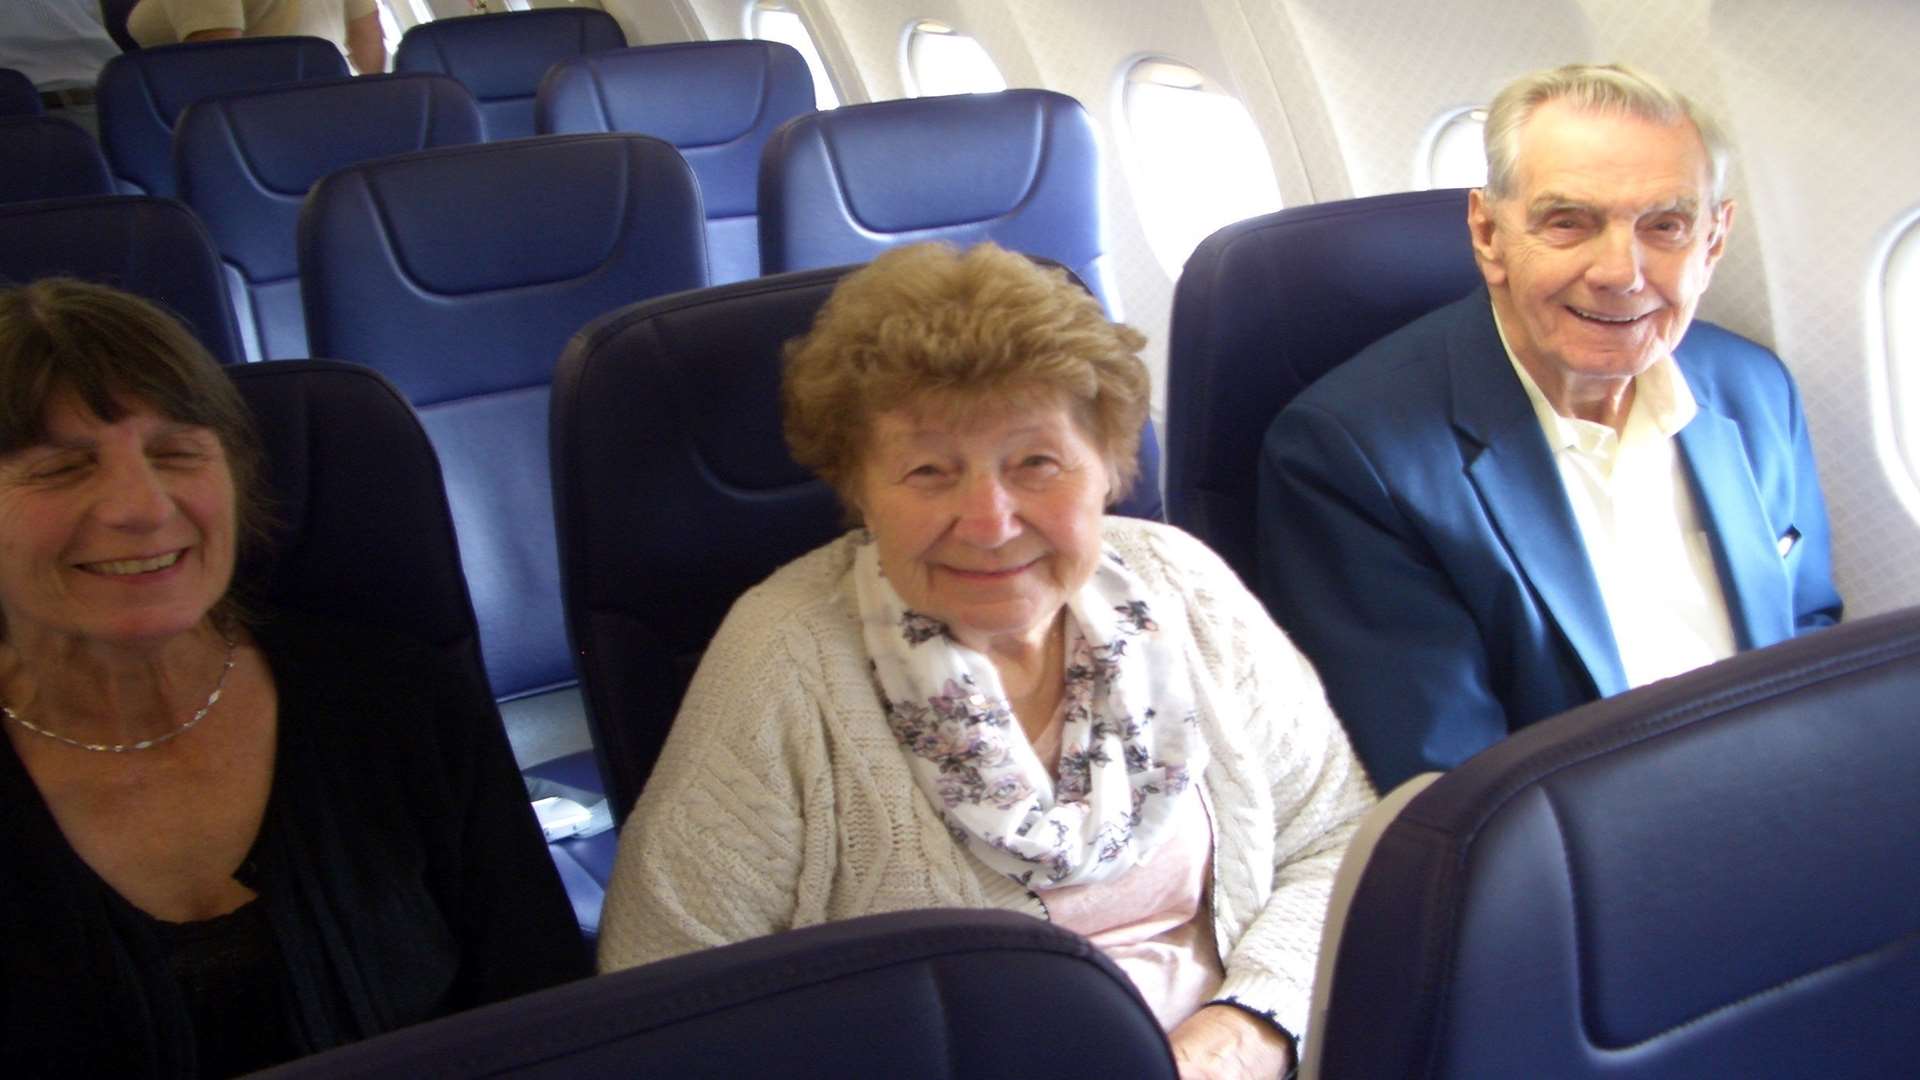 Charlie and Madge Pallett set off on their first trip aboard in more than 70 years of marriage